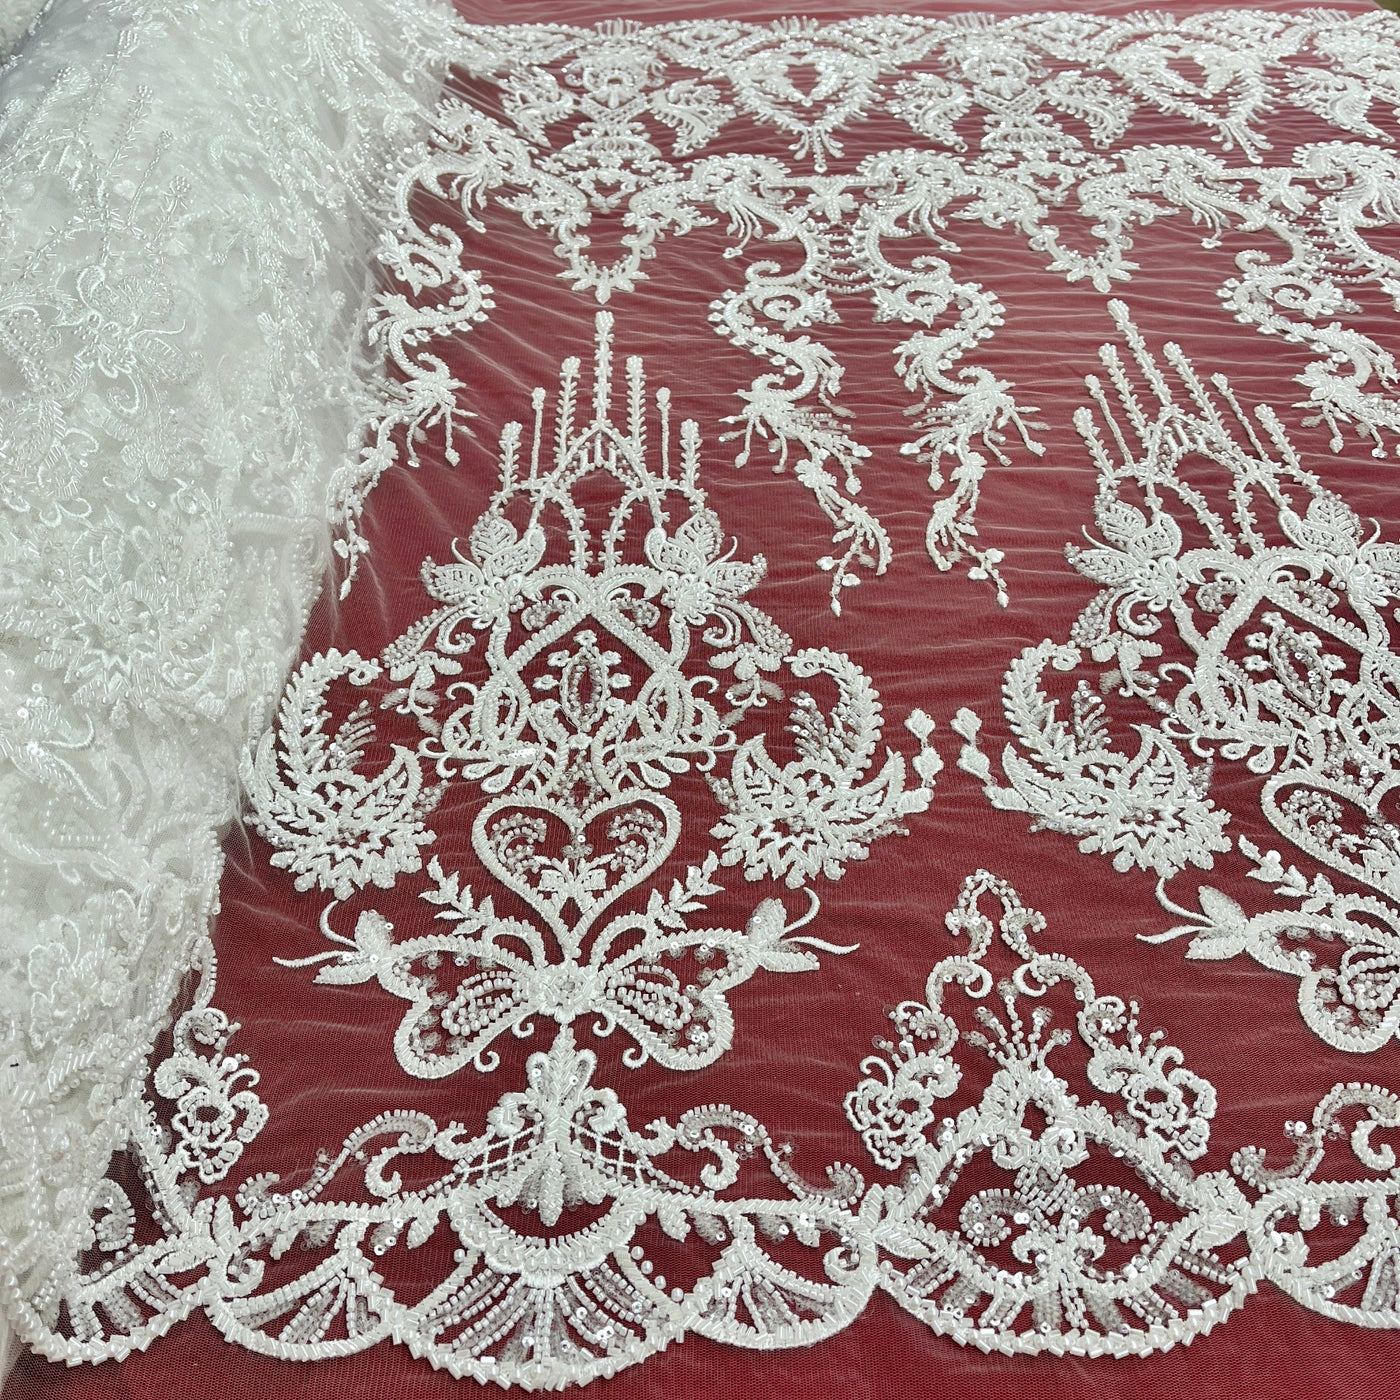 Beaded Lace Fabric Embroidered on 100% Polyester Net Mesh | Lace USA - GD-237189 White